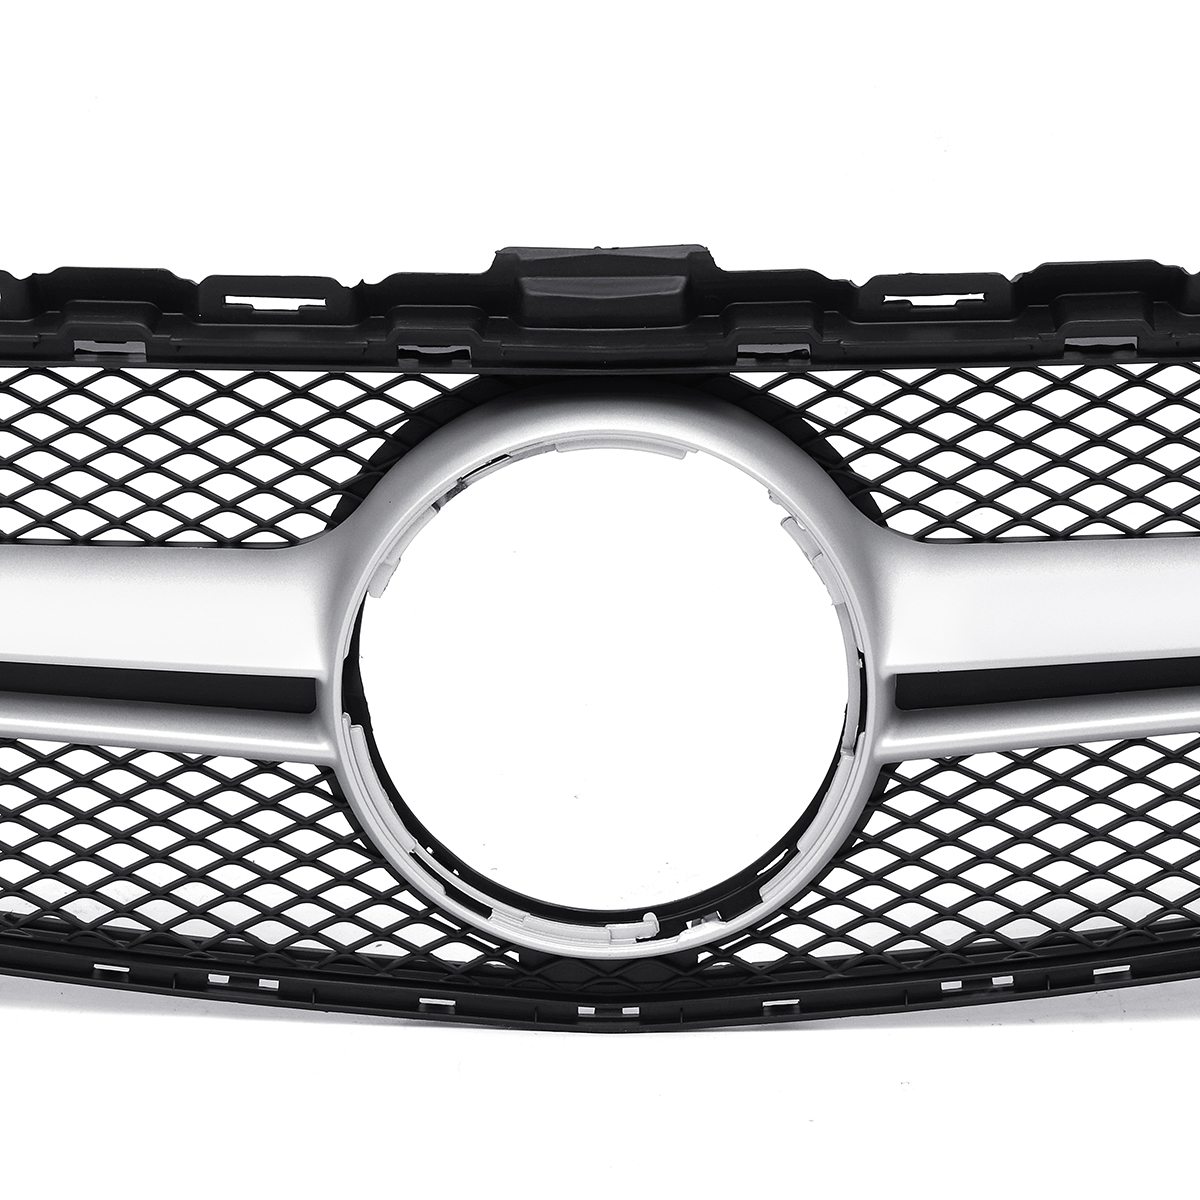 Sliver AMG Style Front Grill Mesh Grille for Mercedes Benz C Class W205 C200 C250 15-18